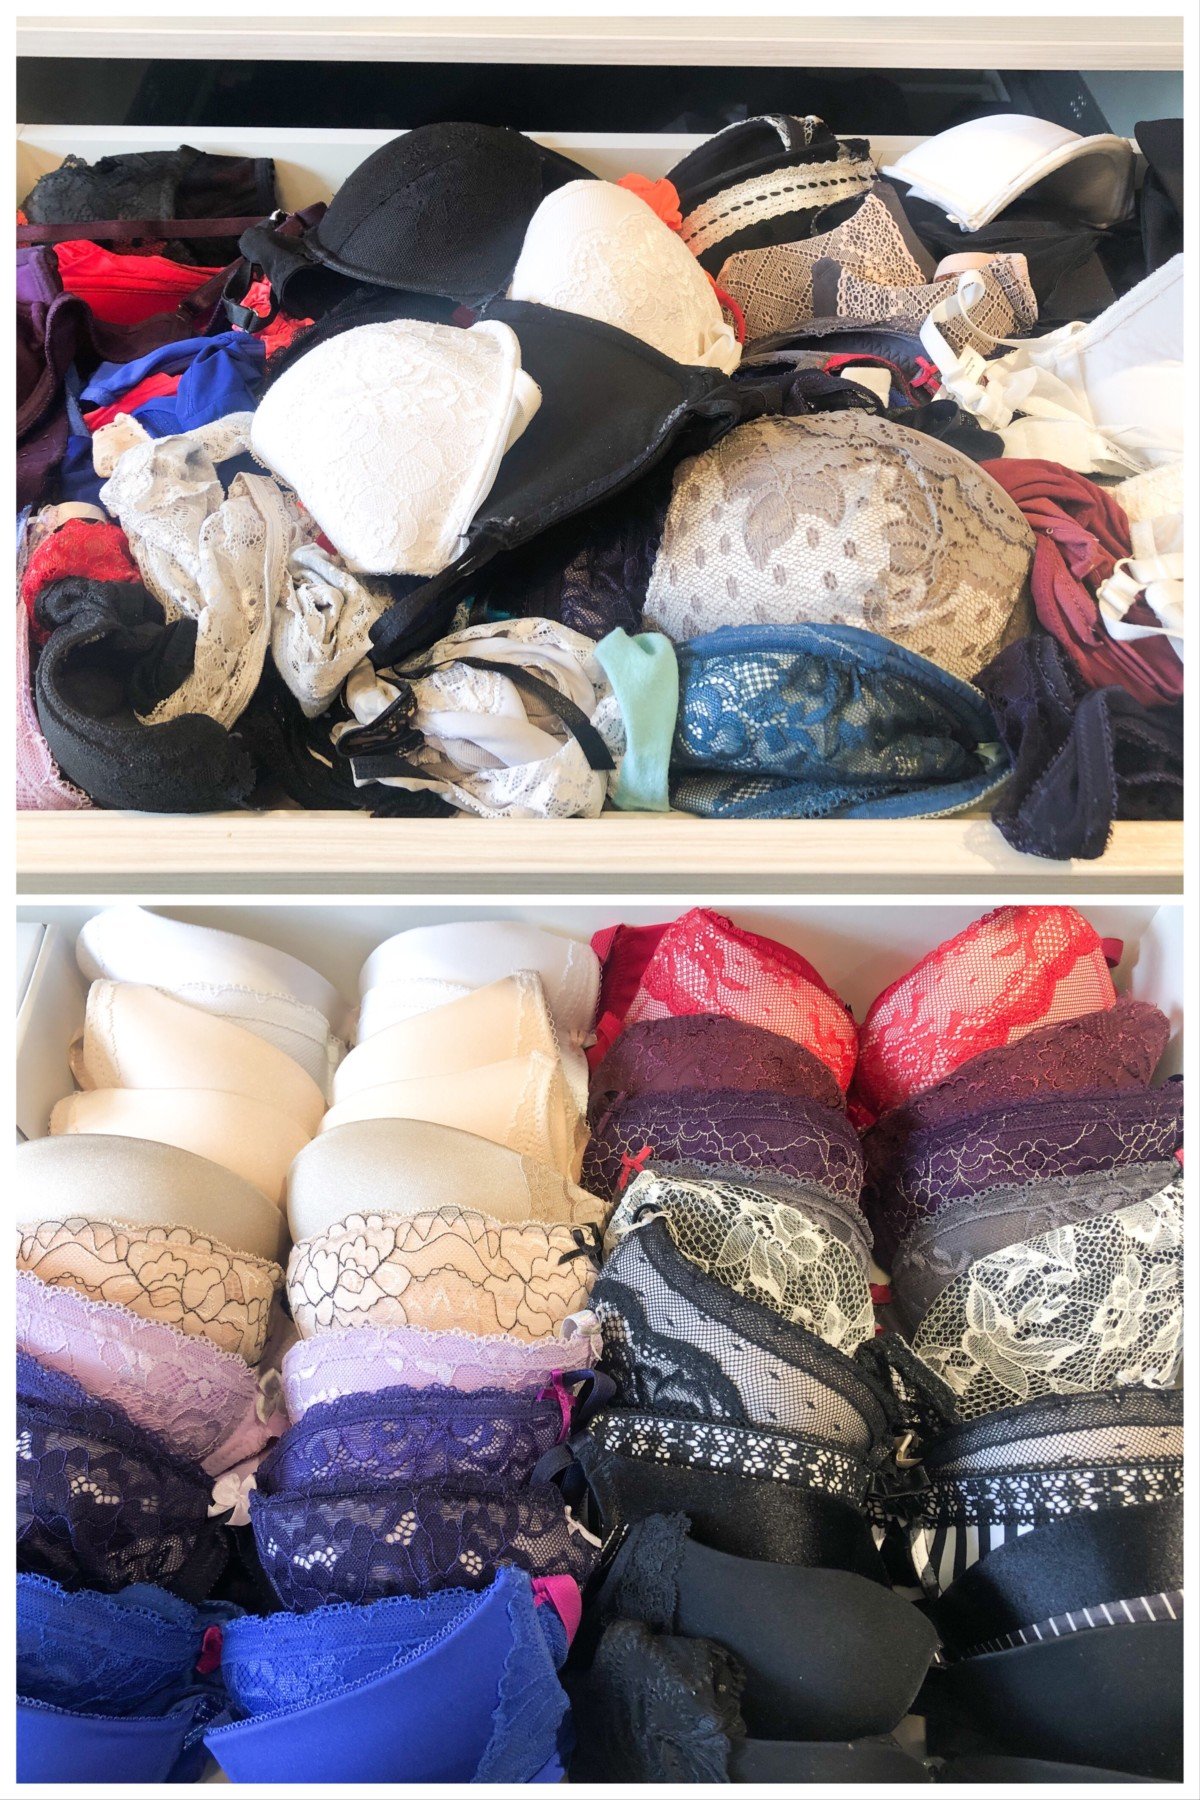 For instance I had a well organised underwear drawer and I put on a bit of weight. So I would take put on a bra and knickers and think 